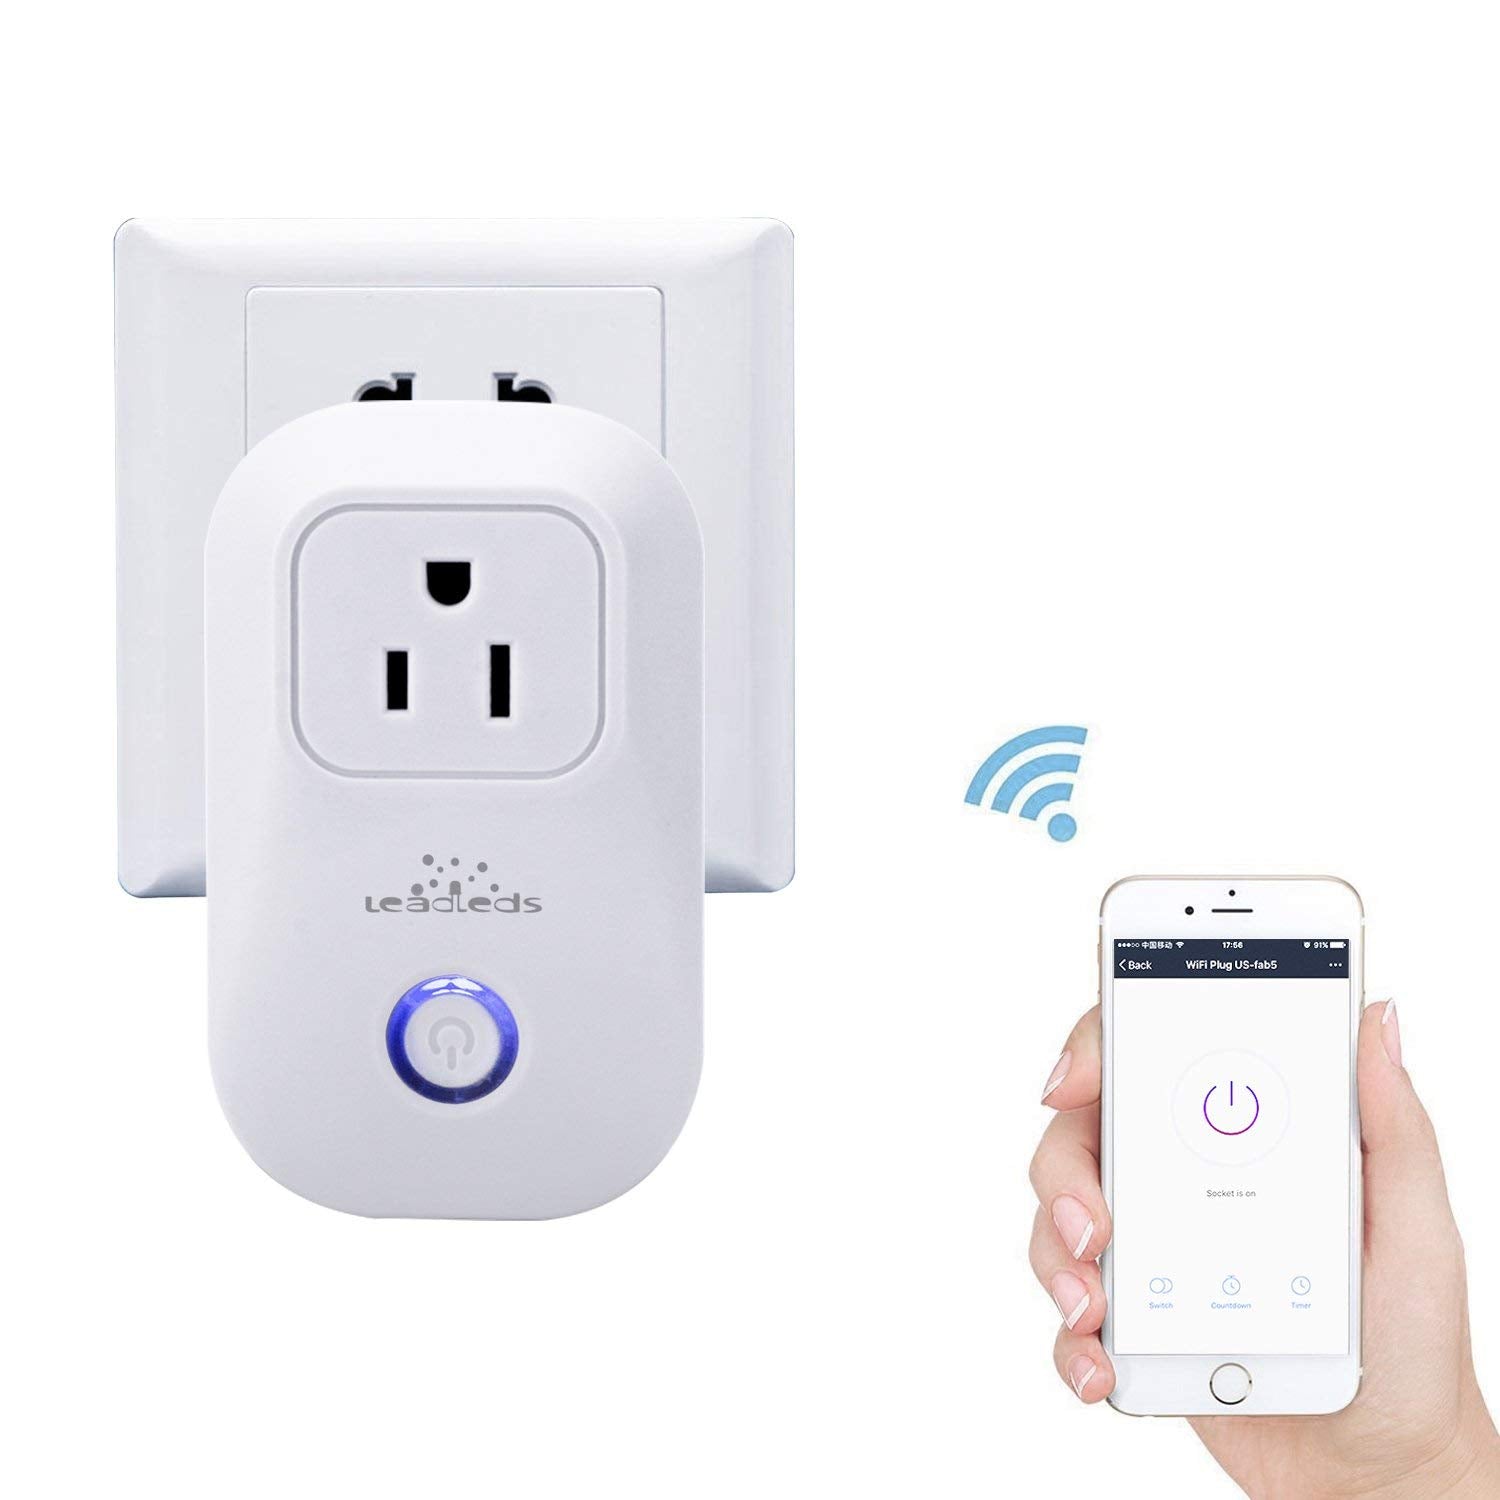 Leadleds Wi-Fi Smart Socket Outlet US Plug, Turn ON/OFF Electronics from Anywhere, Works with Smart Phone, UL Listed - Leadleds